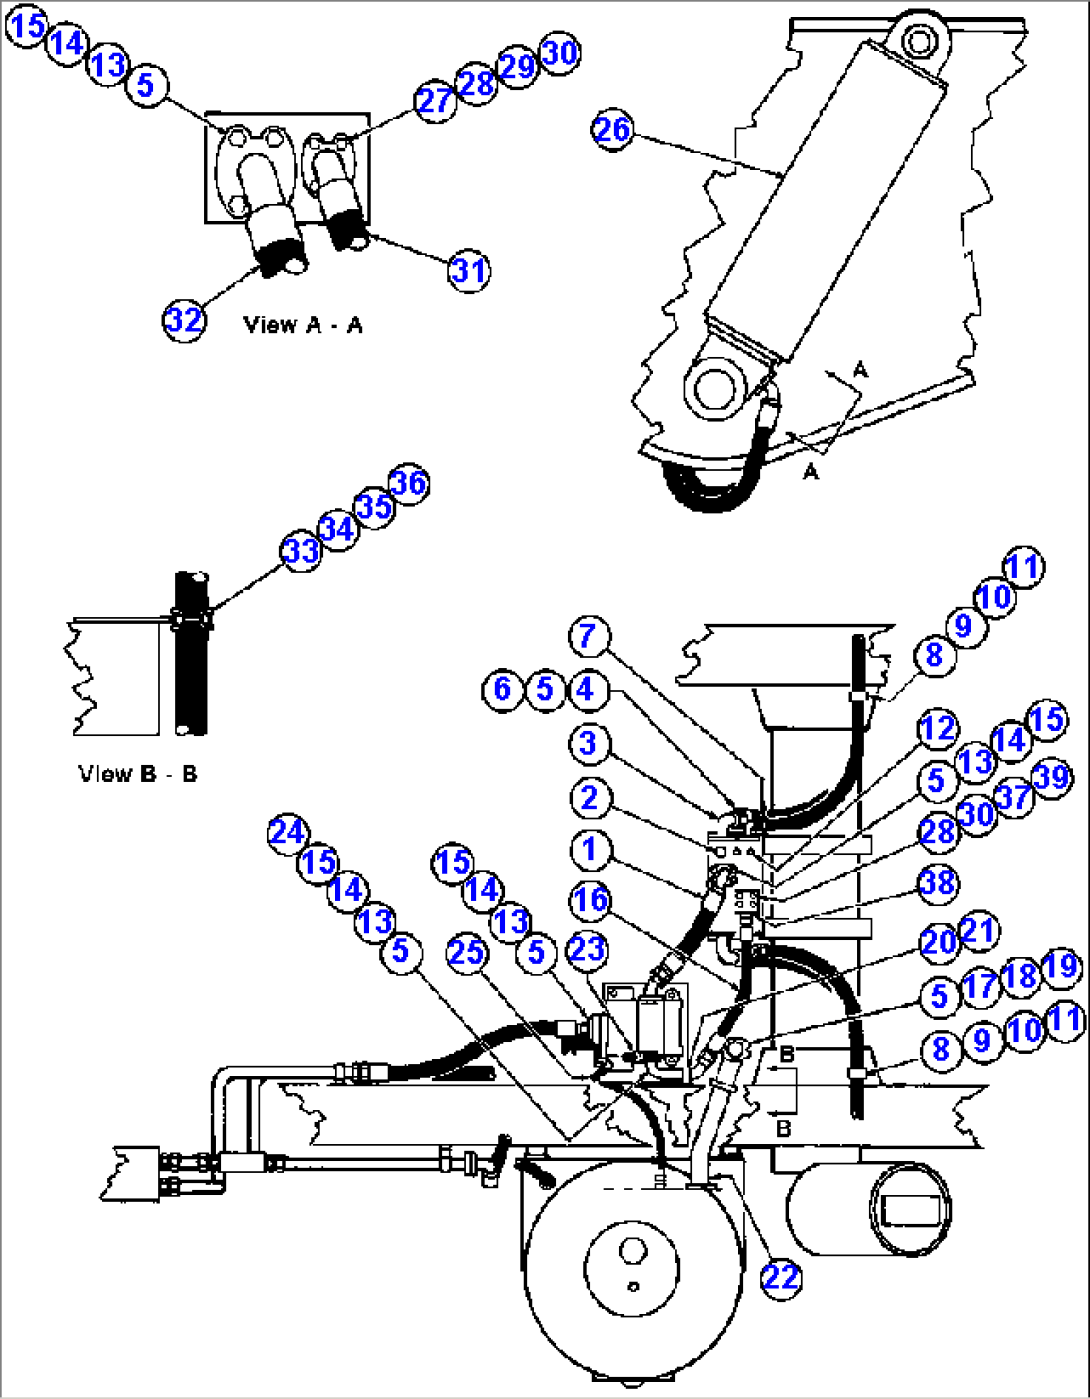 HOIST SYSTEM PIPING